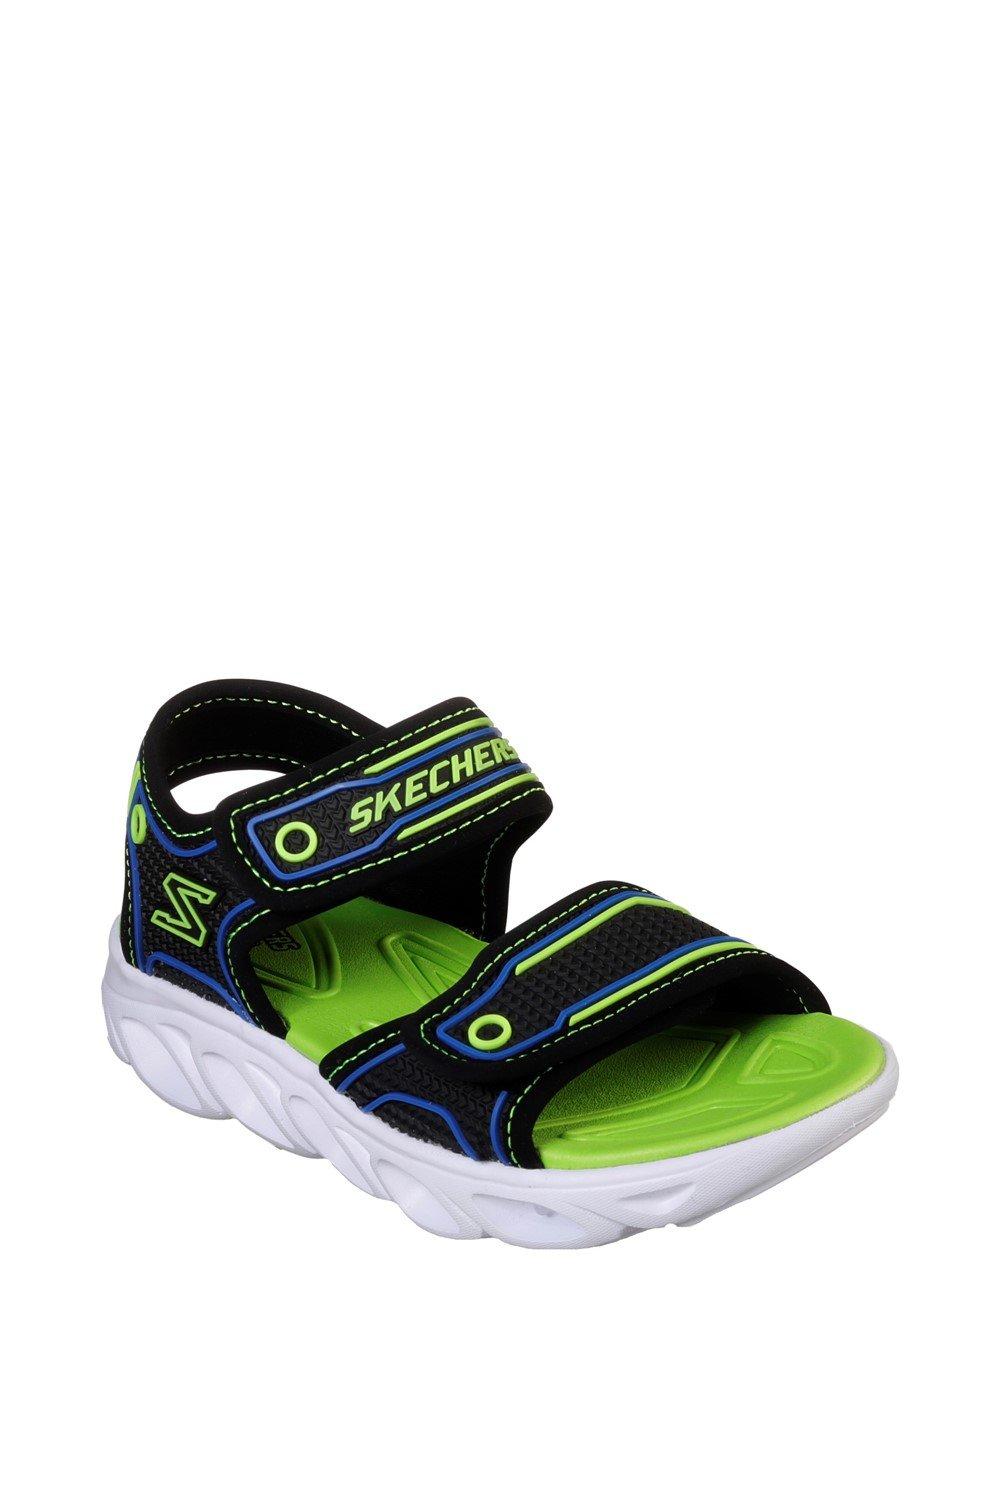 Skechers 'Hypno-Flash 3.0' Synthetic Sandals